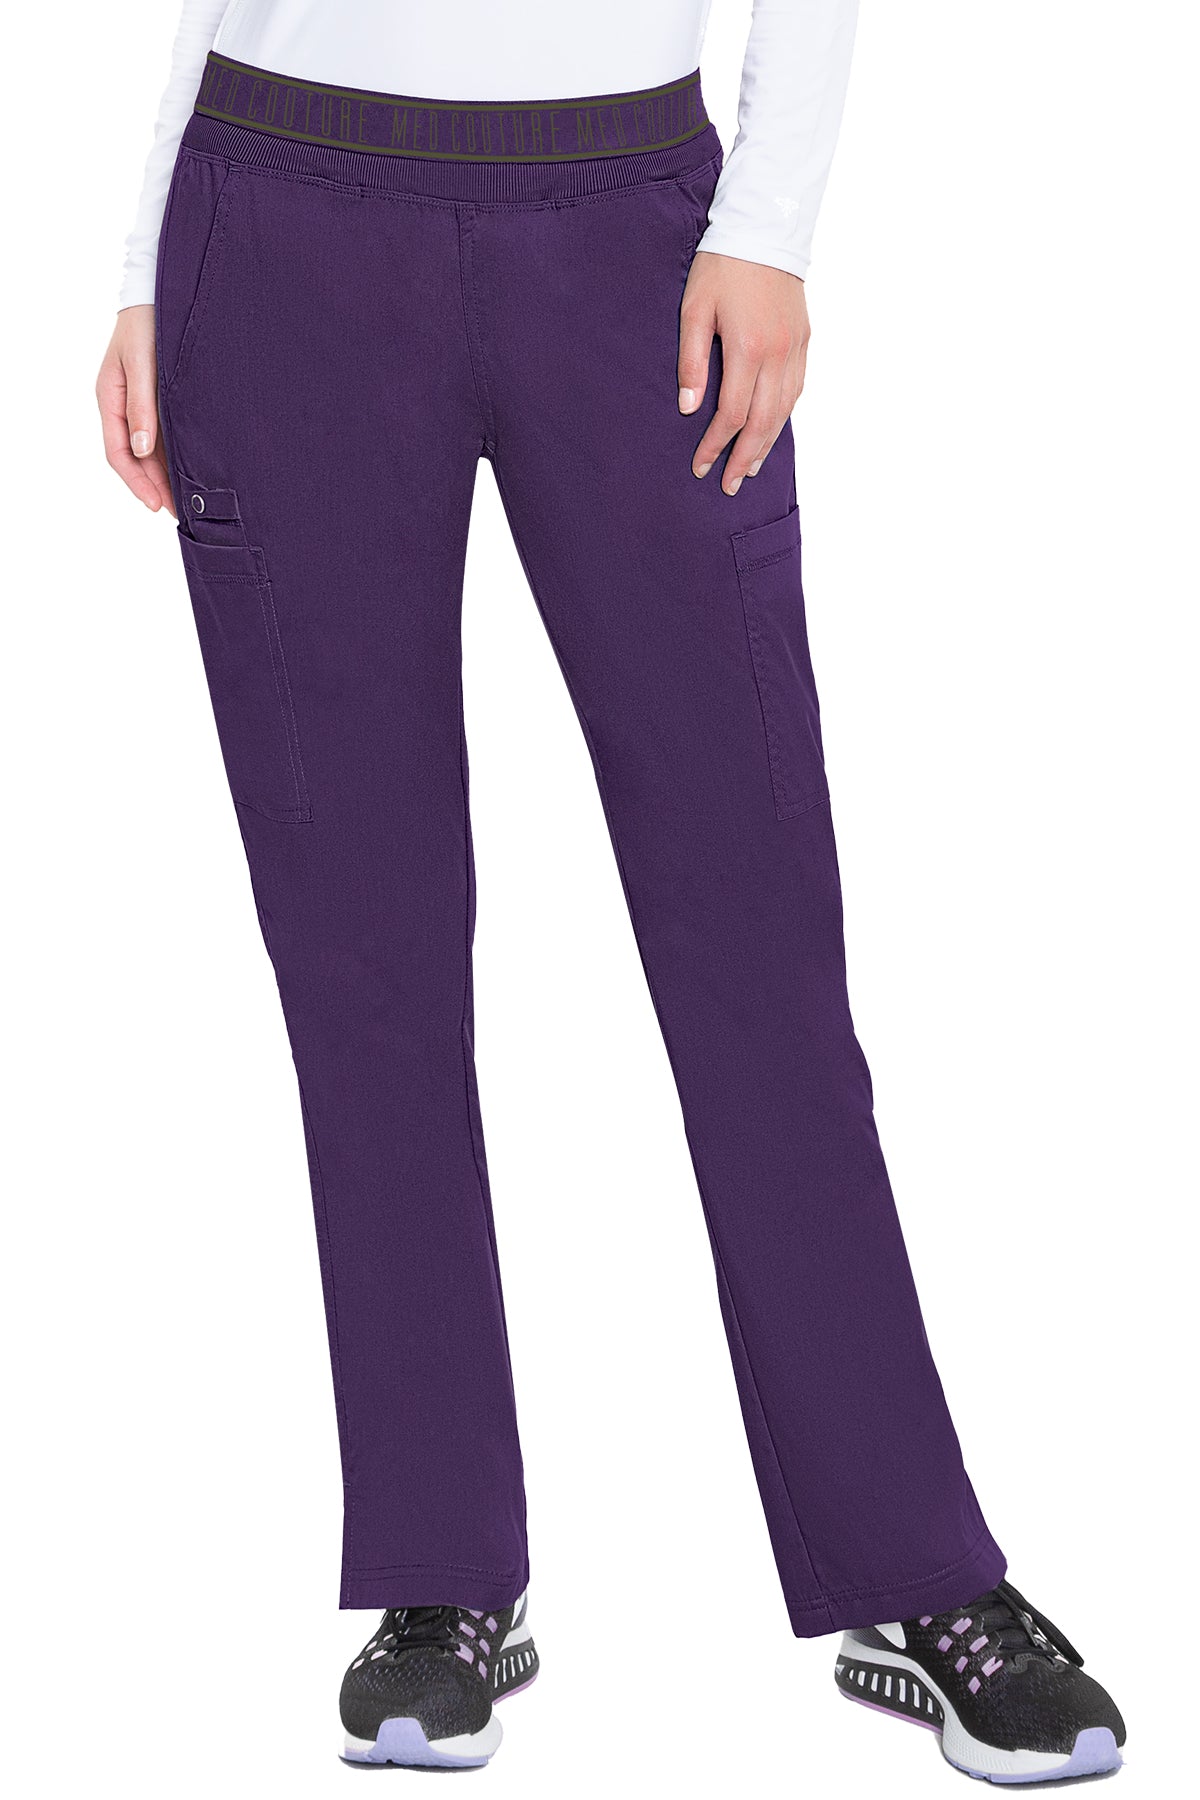 Yoga 2 Cargo Pocket Pant by Med Couture (Regular) XS-5XL/ Eggplant